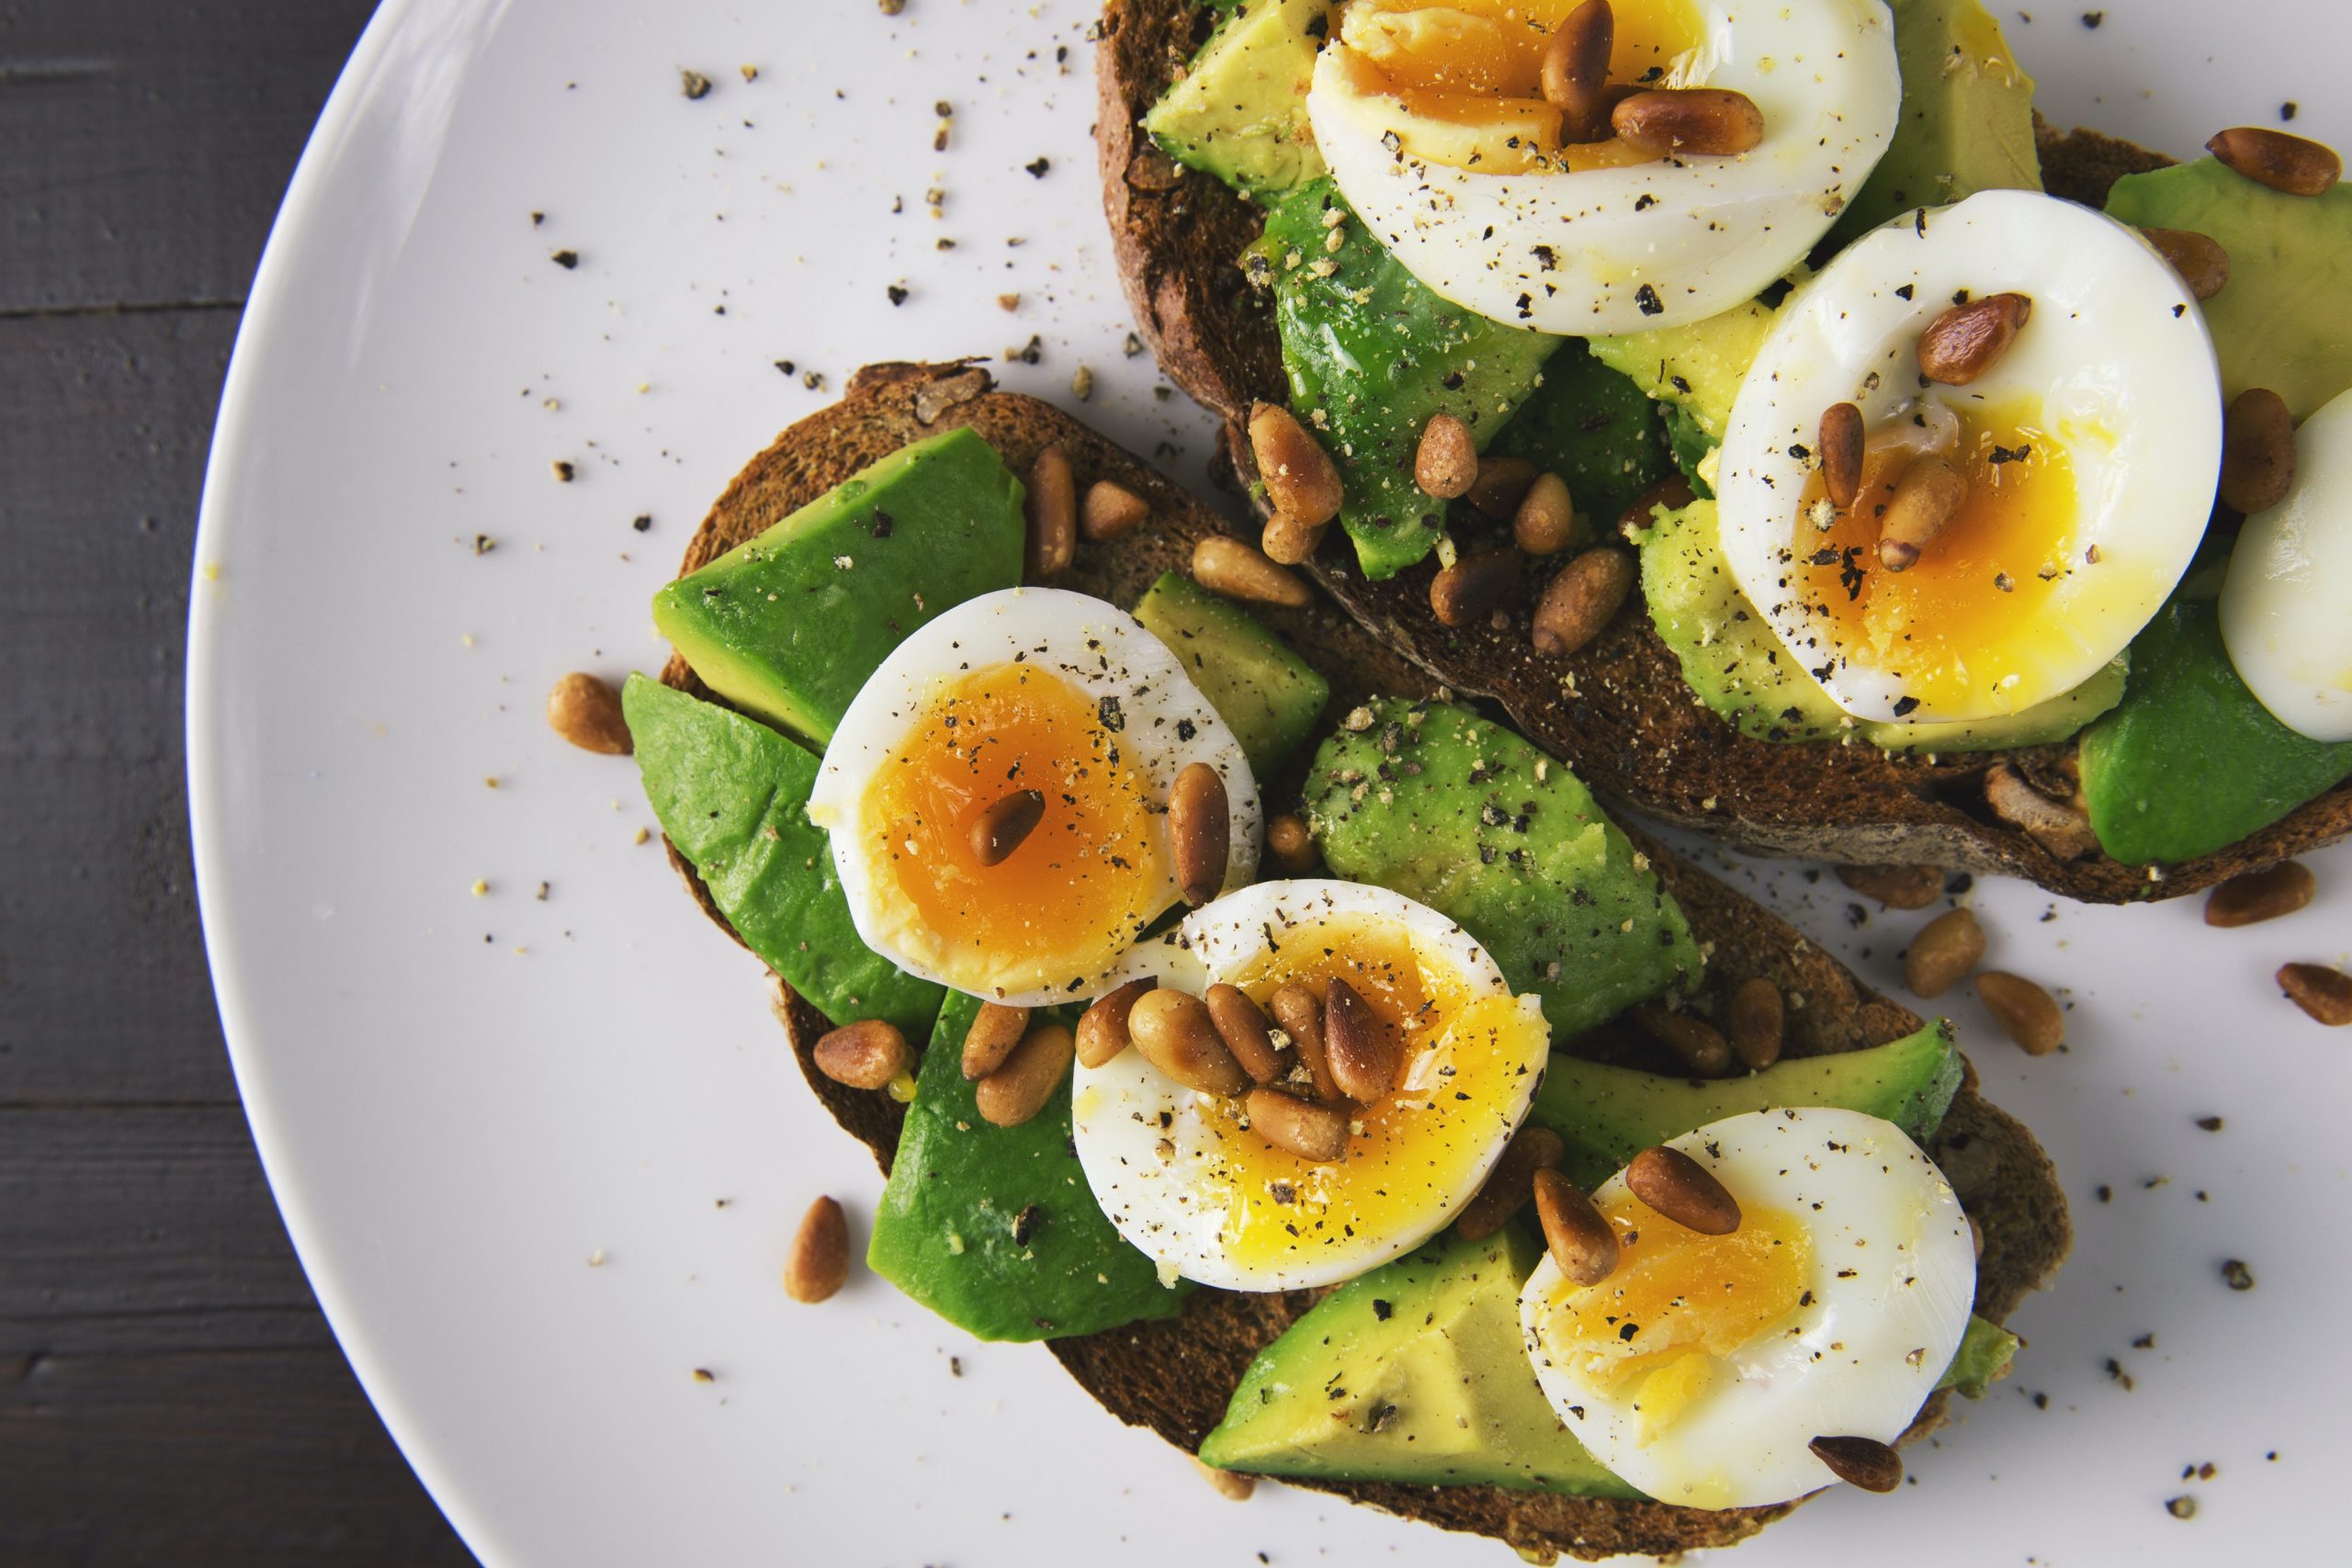 Plate of food with toast, avocado, eggs and nuts